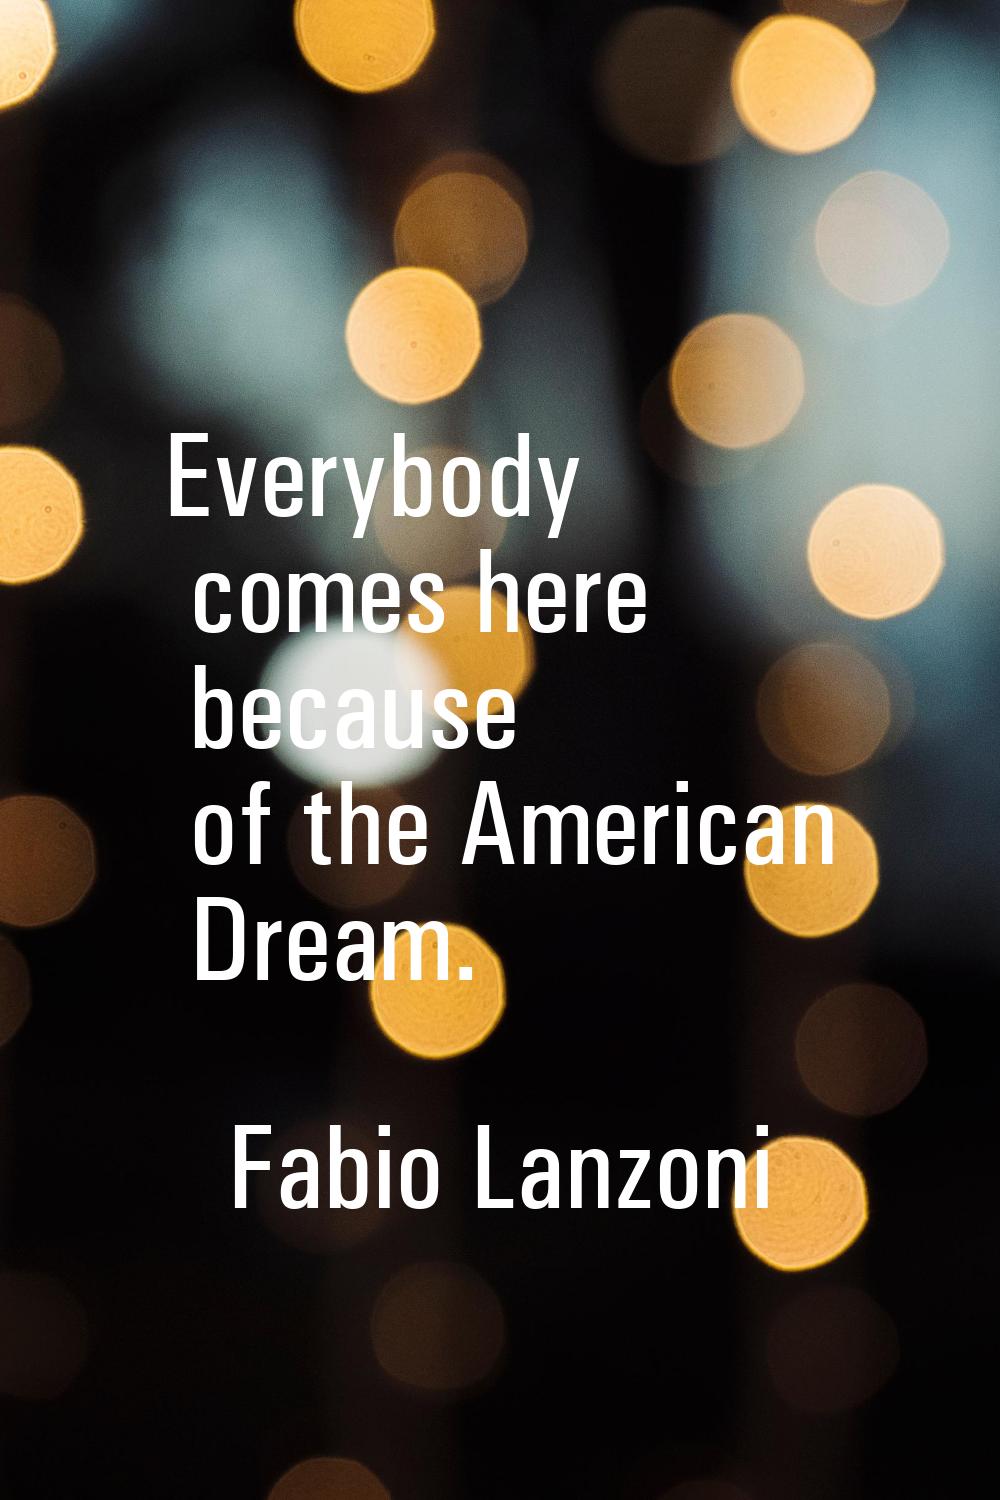 Everybody comes here because of the American Dream.